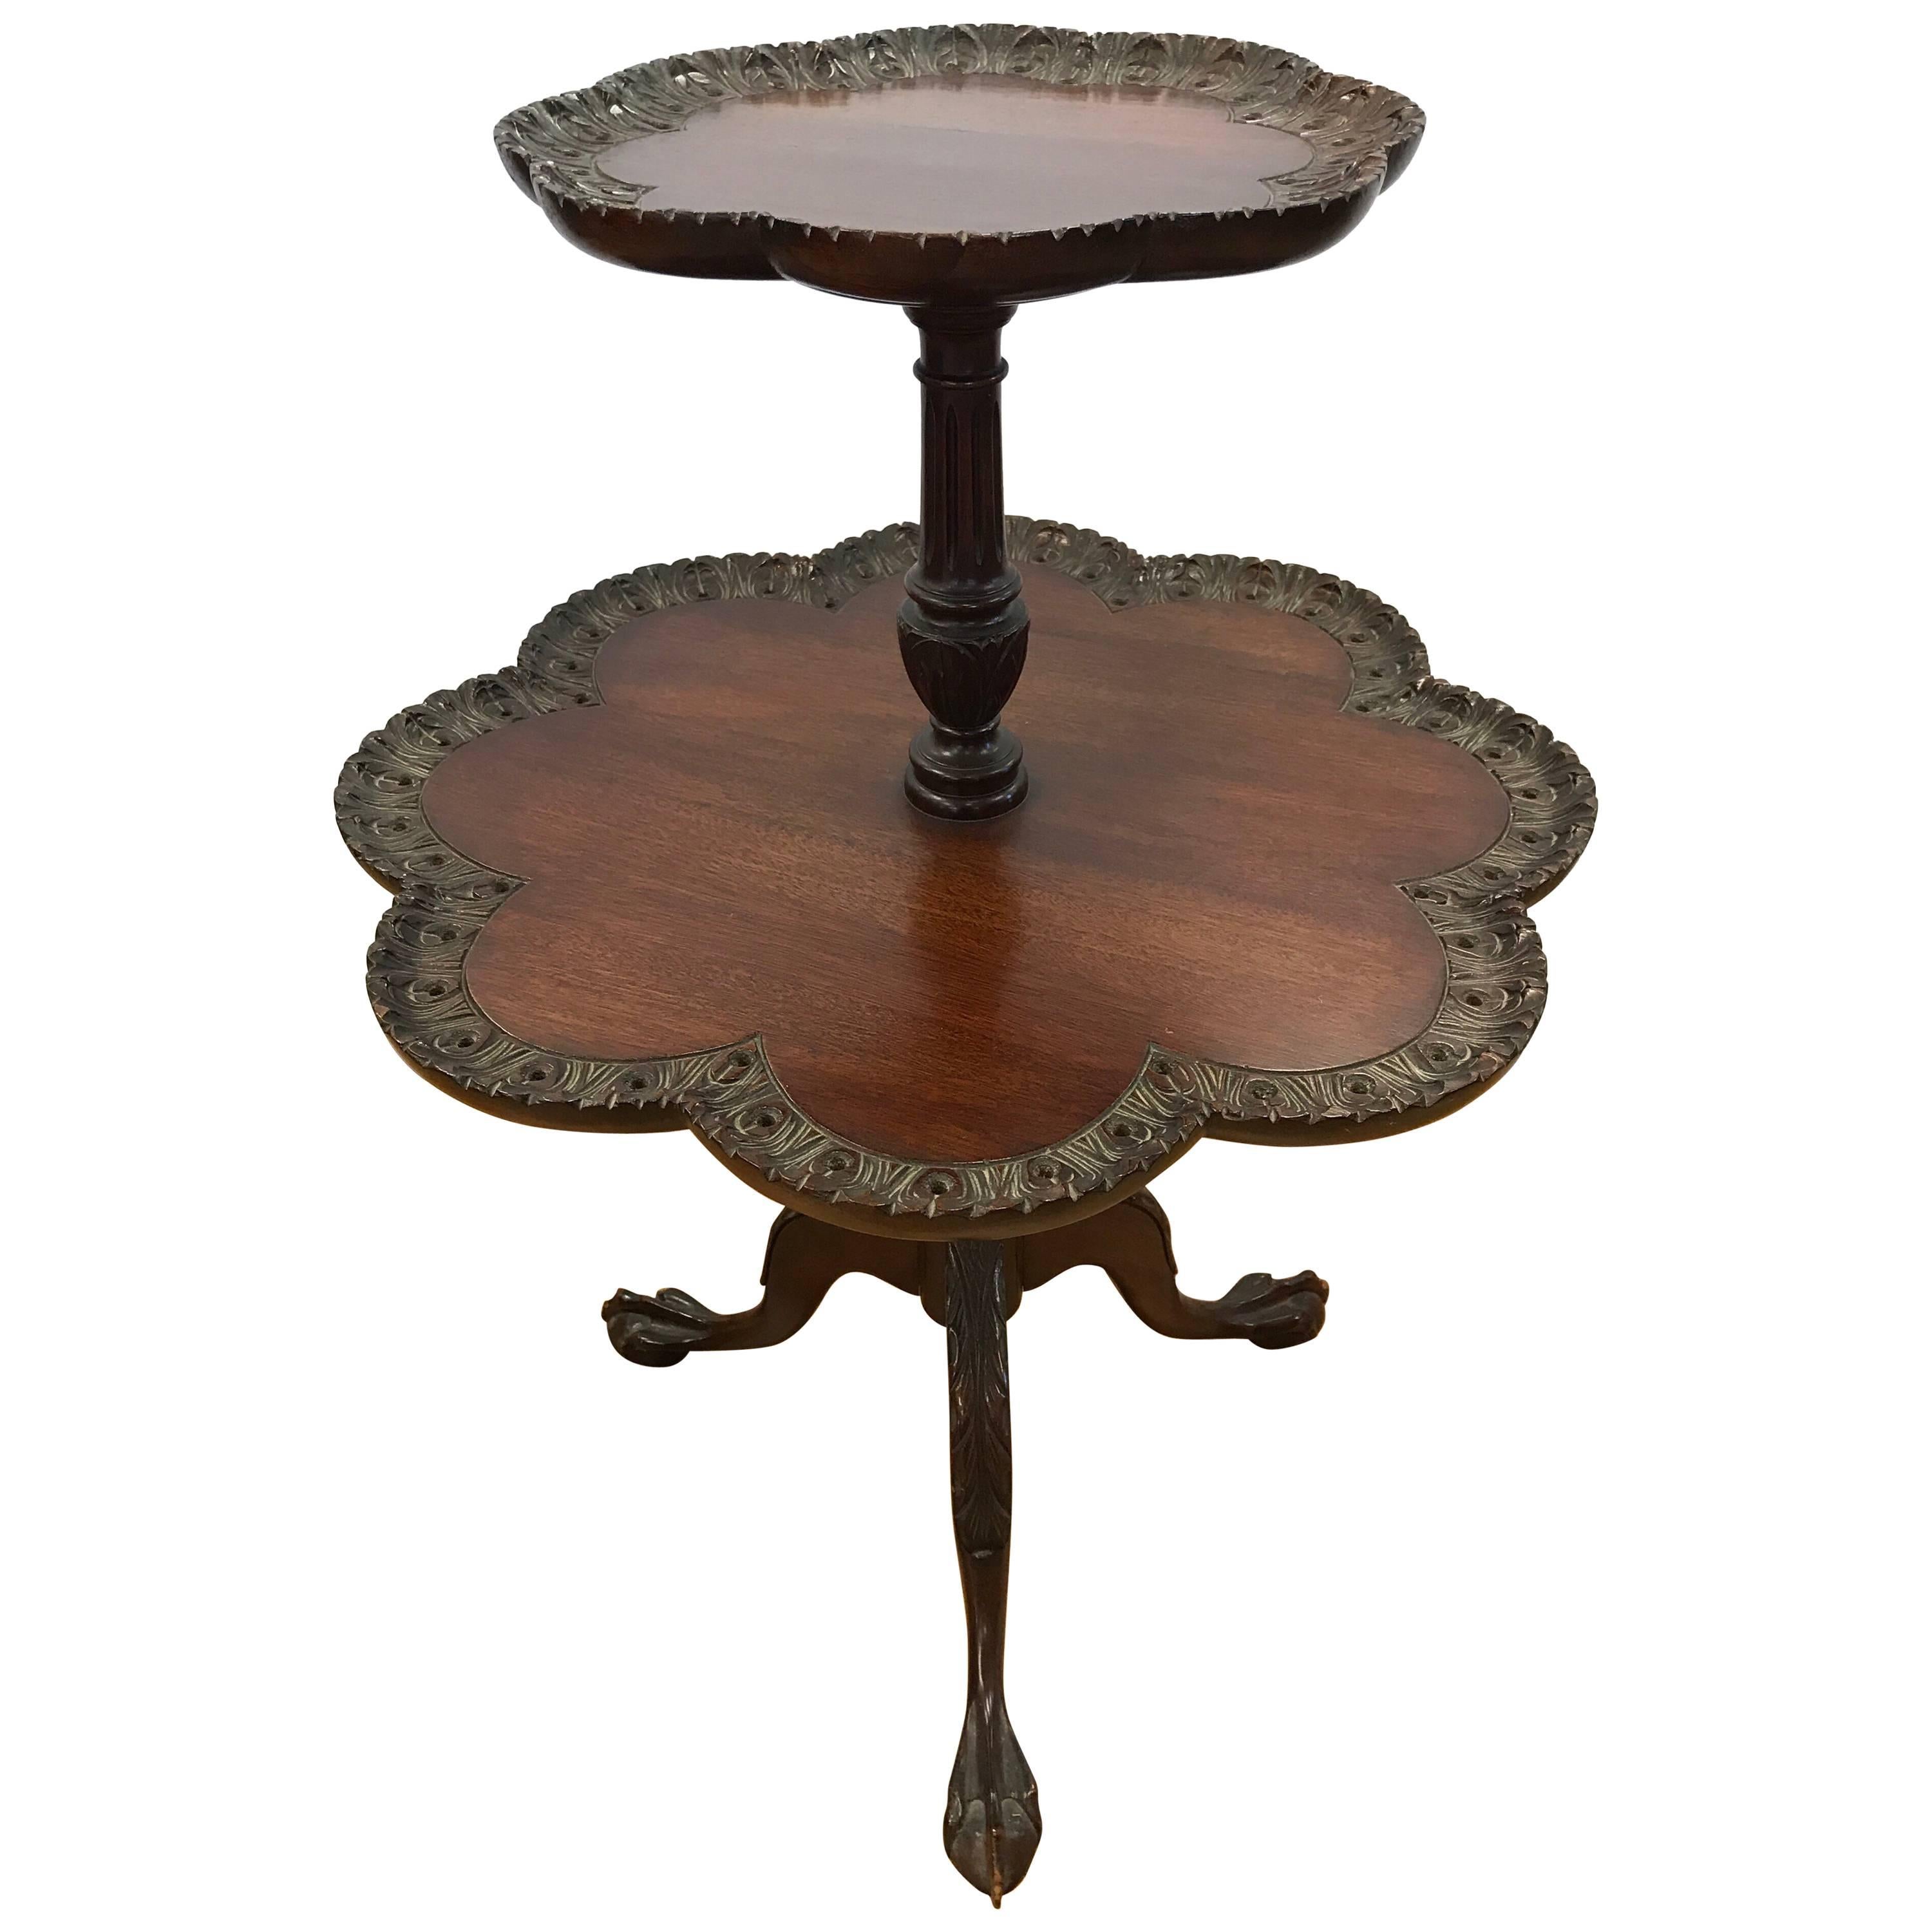 Antique Chippendale Mahogany Two-Tiered Pie Crust Table